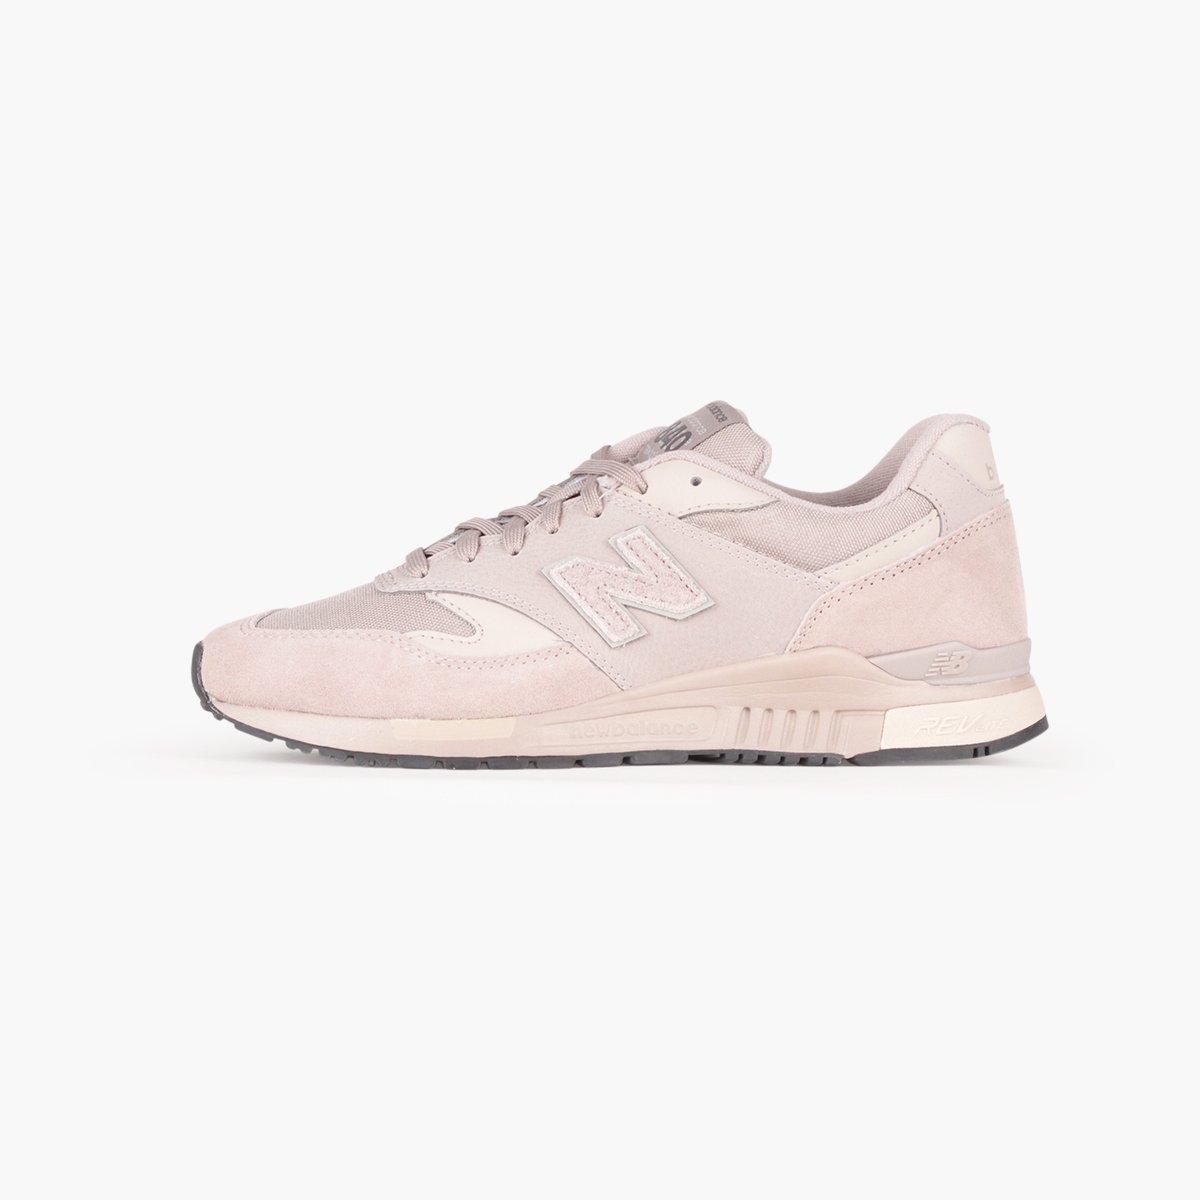 New Balance 840-SUEDE Store